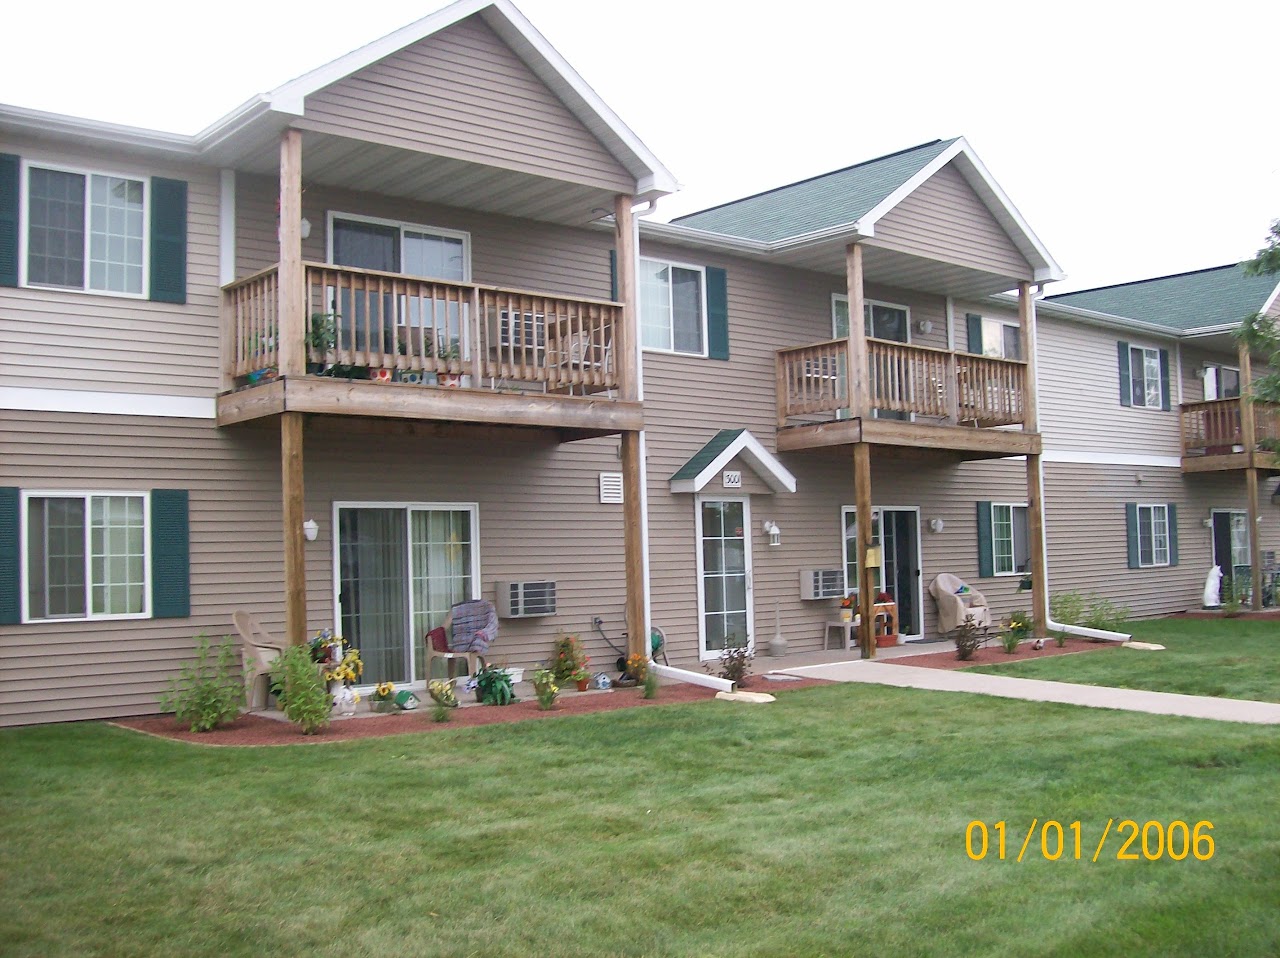 Photo of CAMELOT VILLAGE. Affordable housing located at 3000 GALAHAD LN RICE LAKE, WI 54868